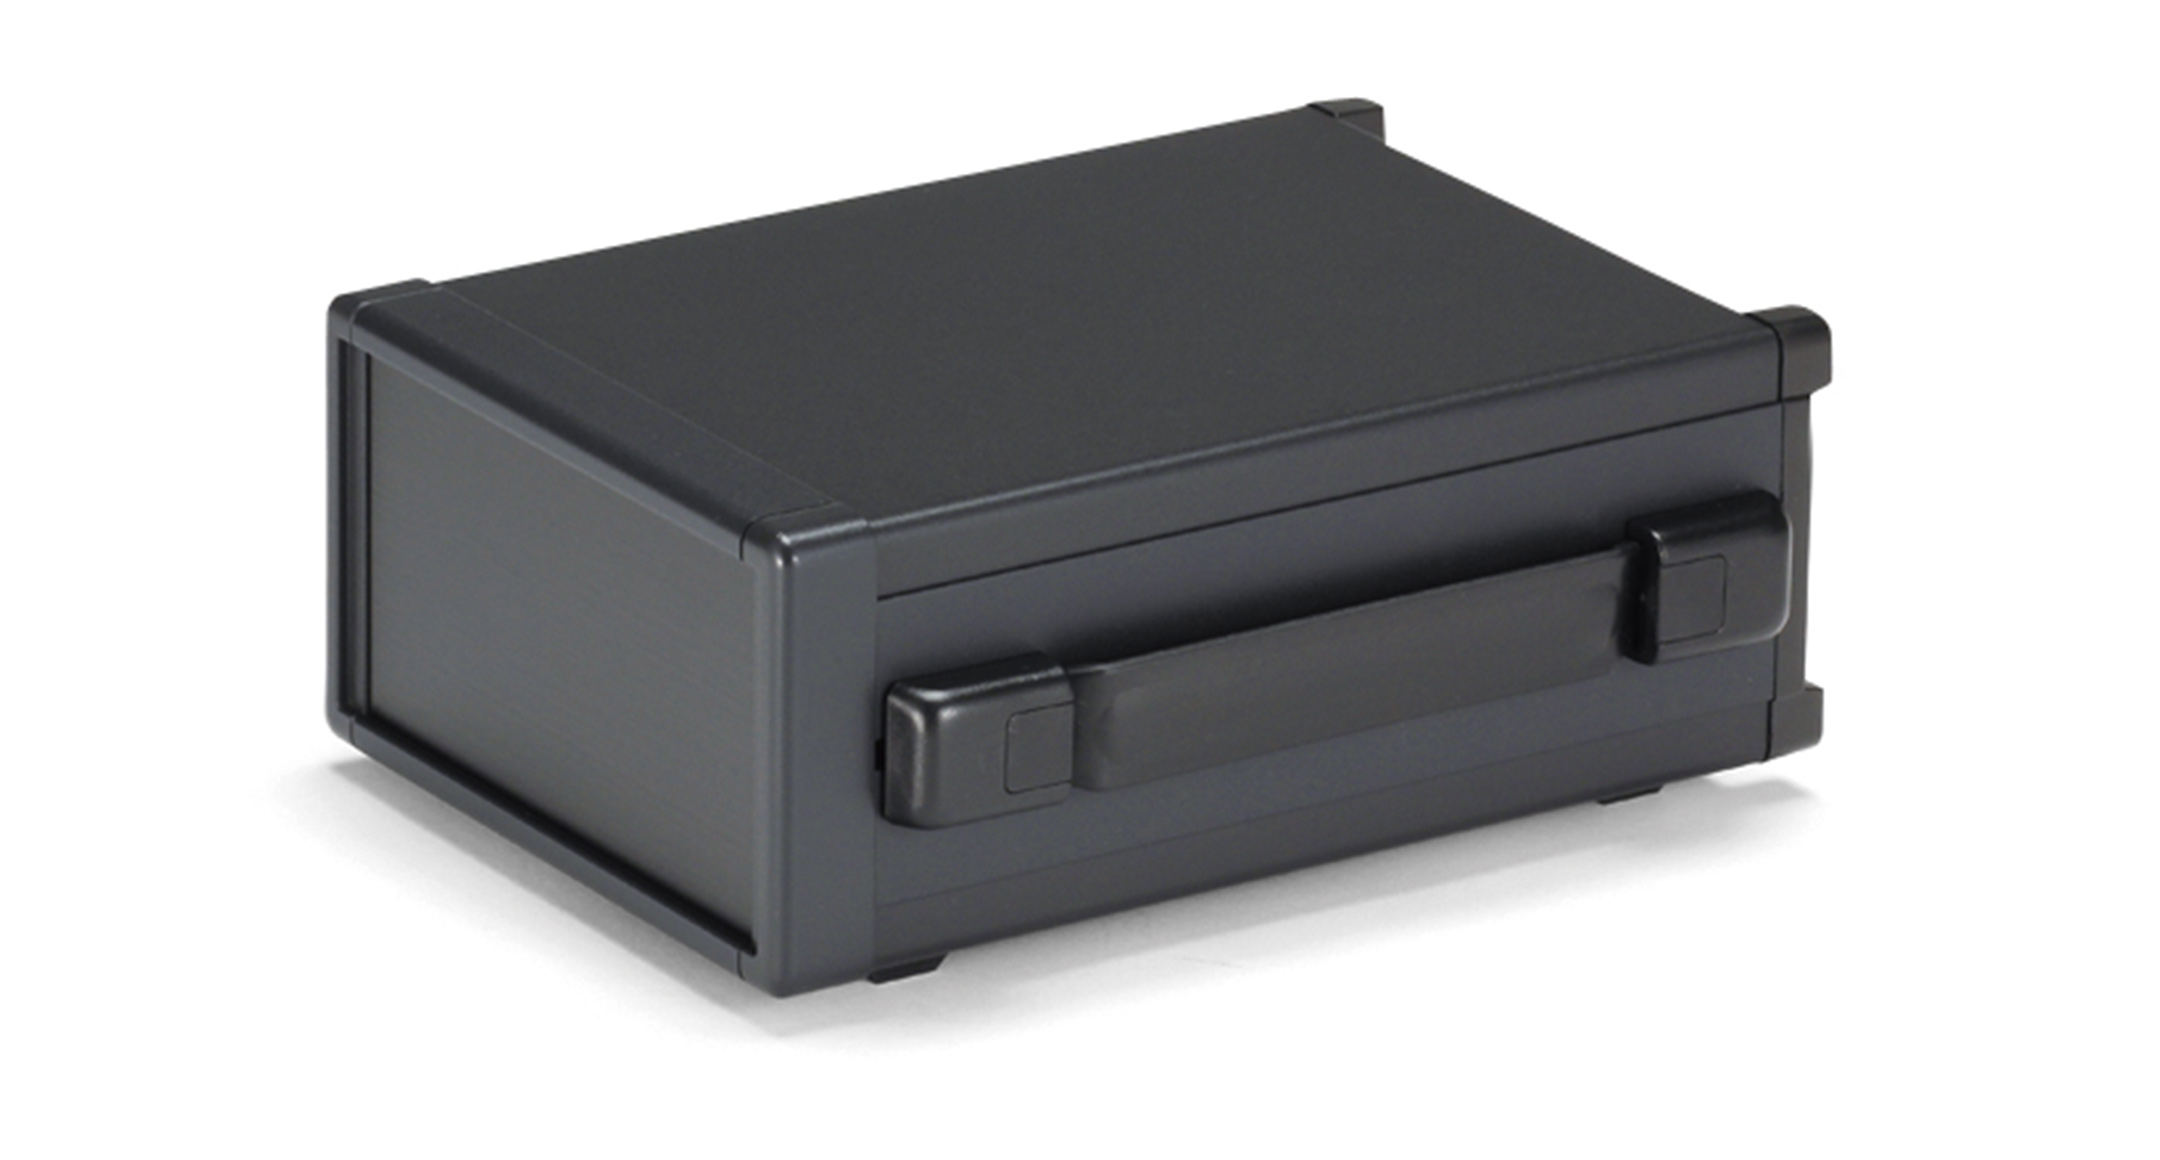 ALUMINUM ENCLOSURE with CARRYING HANDLE - MOY series:Black/Black